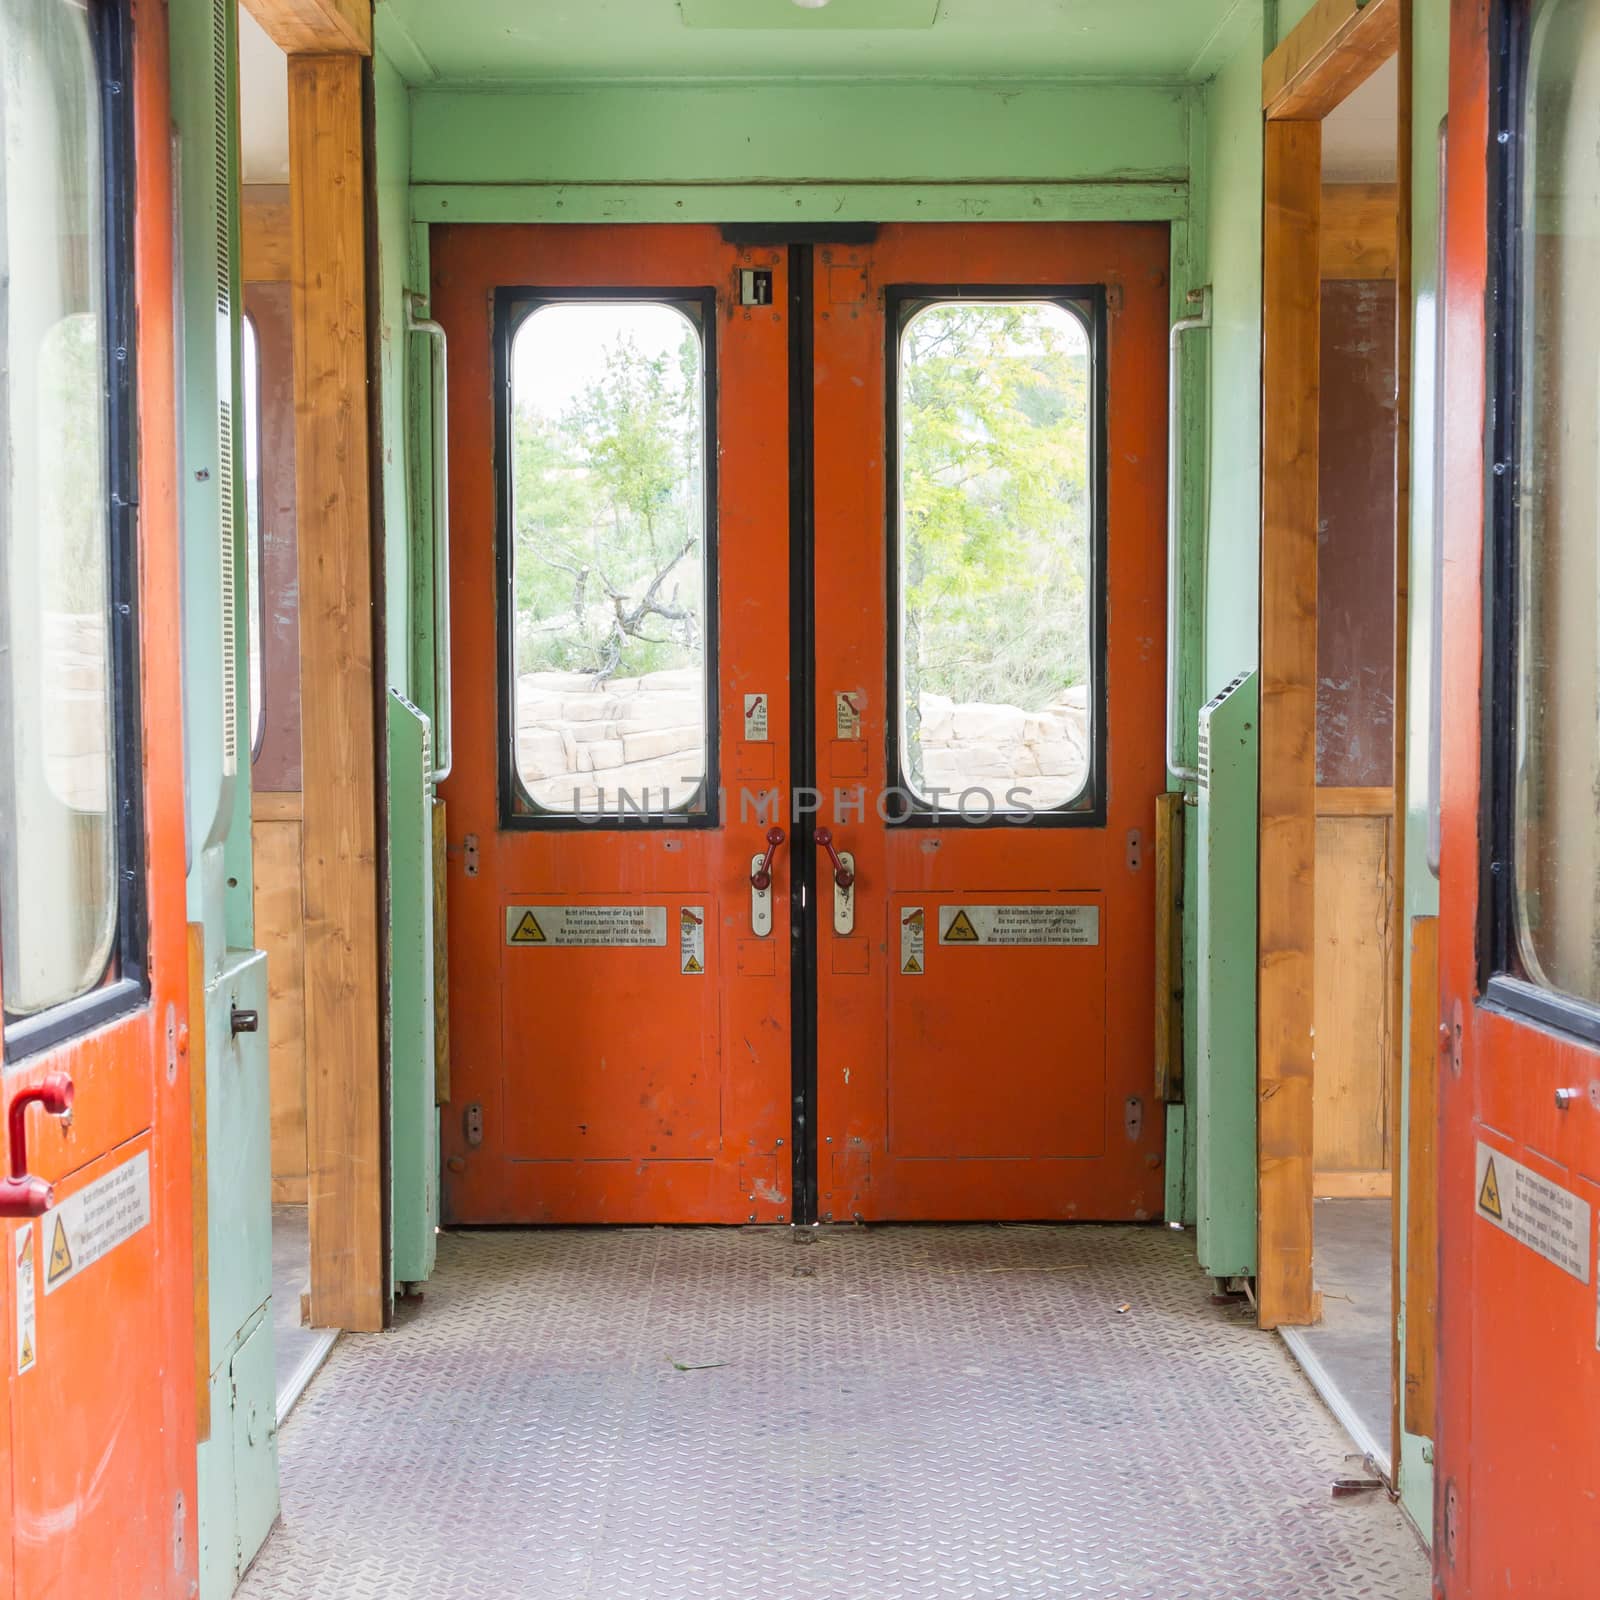 Old empty train carriage by michaklootwijk